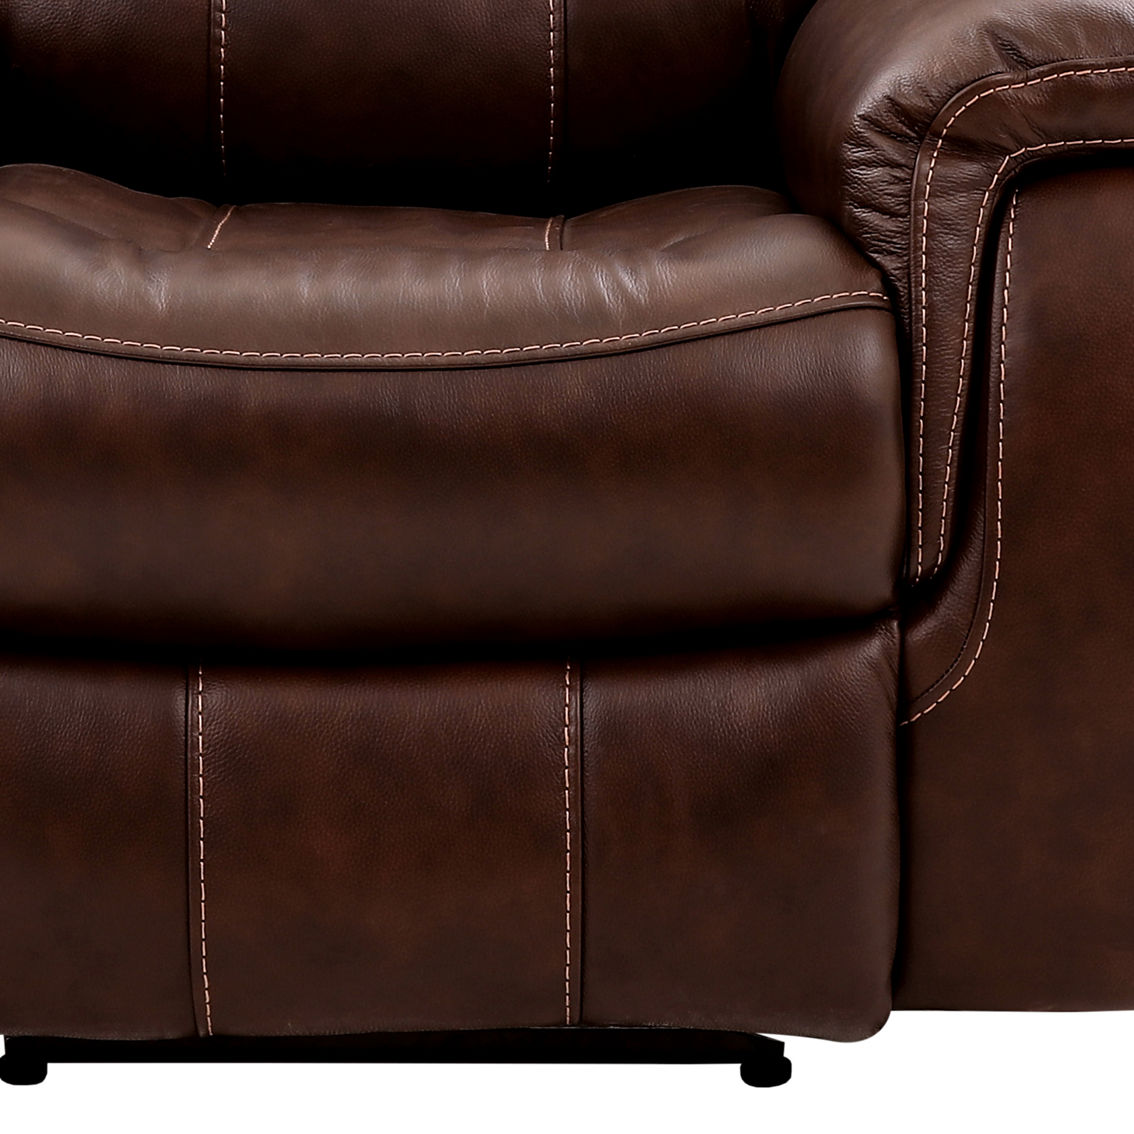 Armen Living Montague Dual Power Headrest and Lumbar Support Leather Recliner - Image 7 of 9